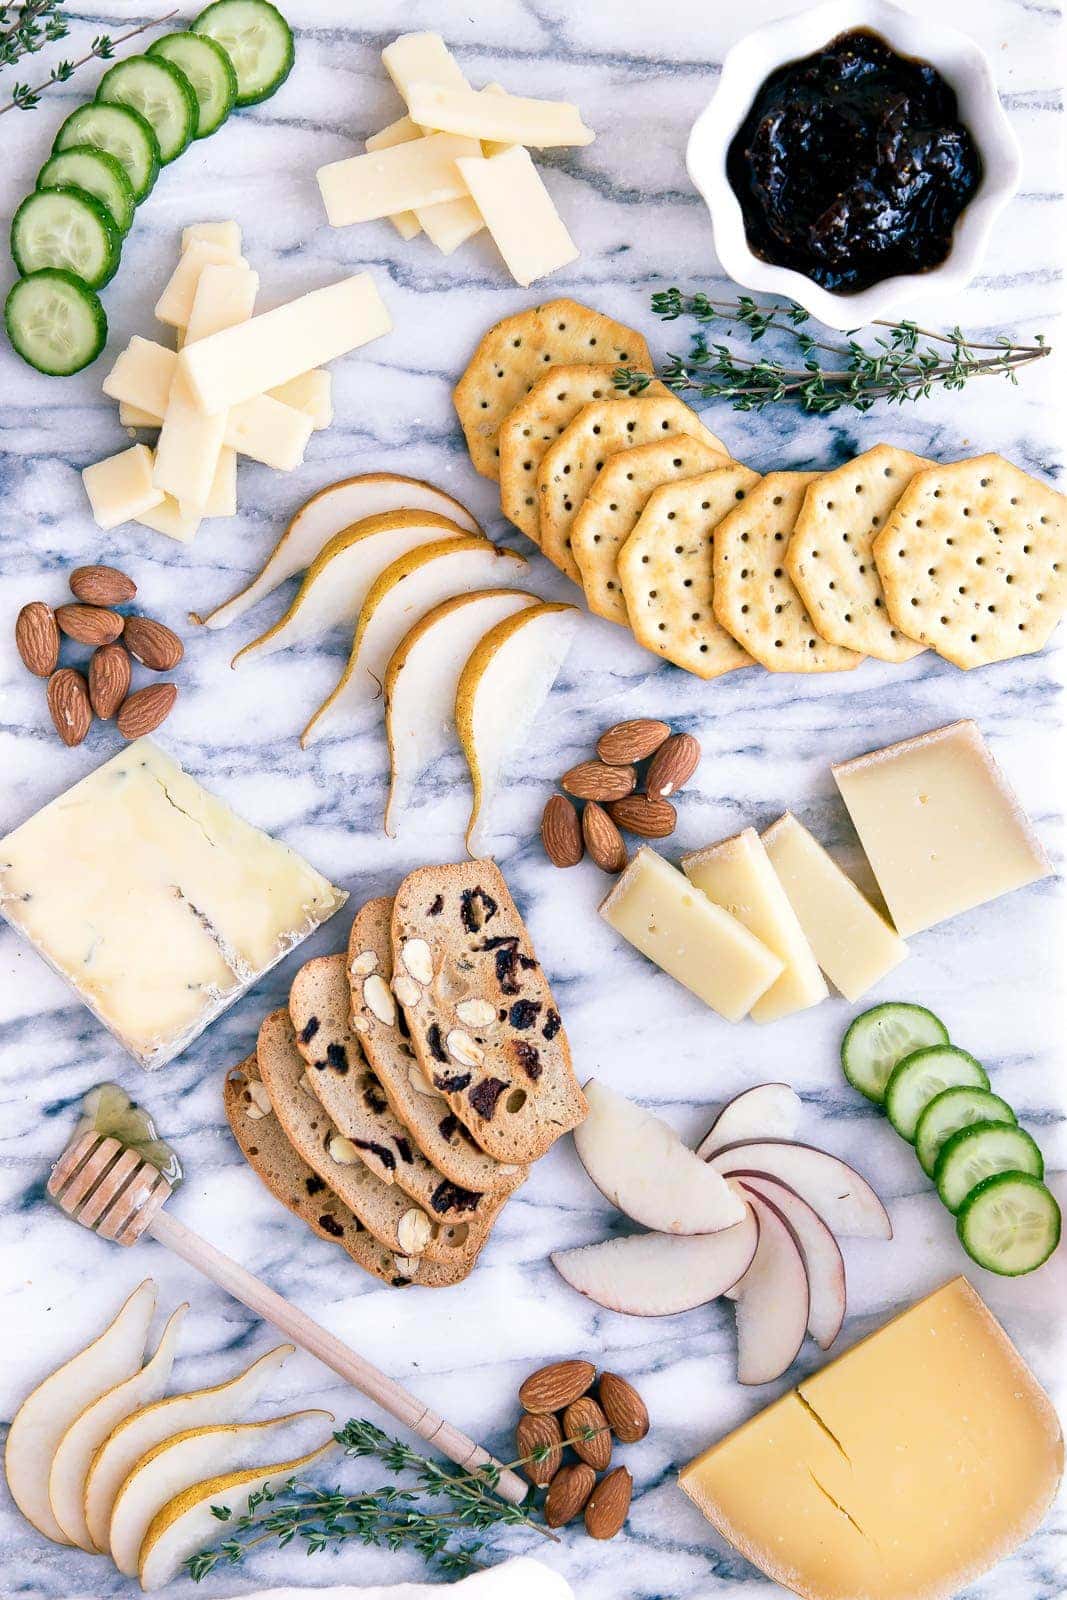 How To Make The Perfect Holiday Cheese Board + Giveaway - Broma Bakery